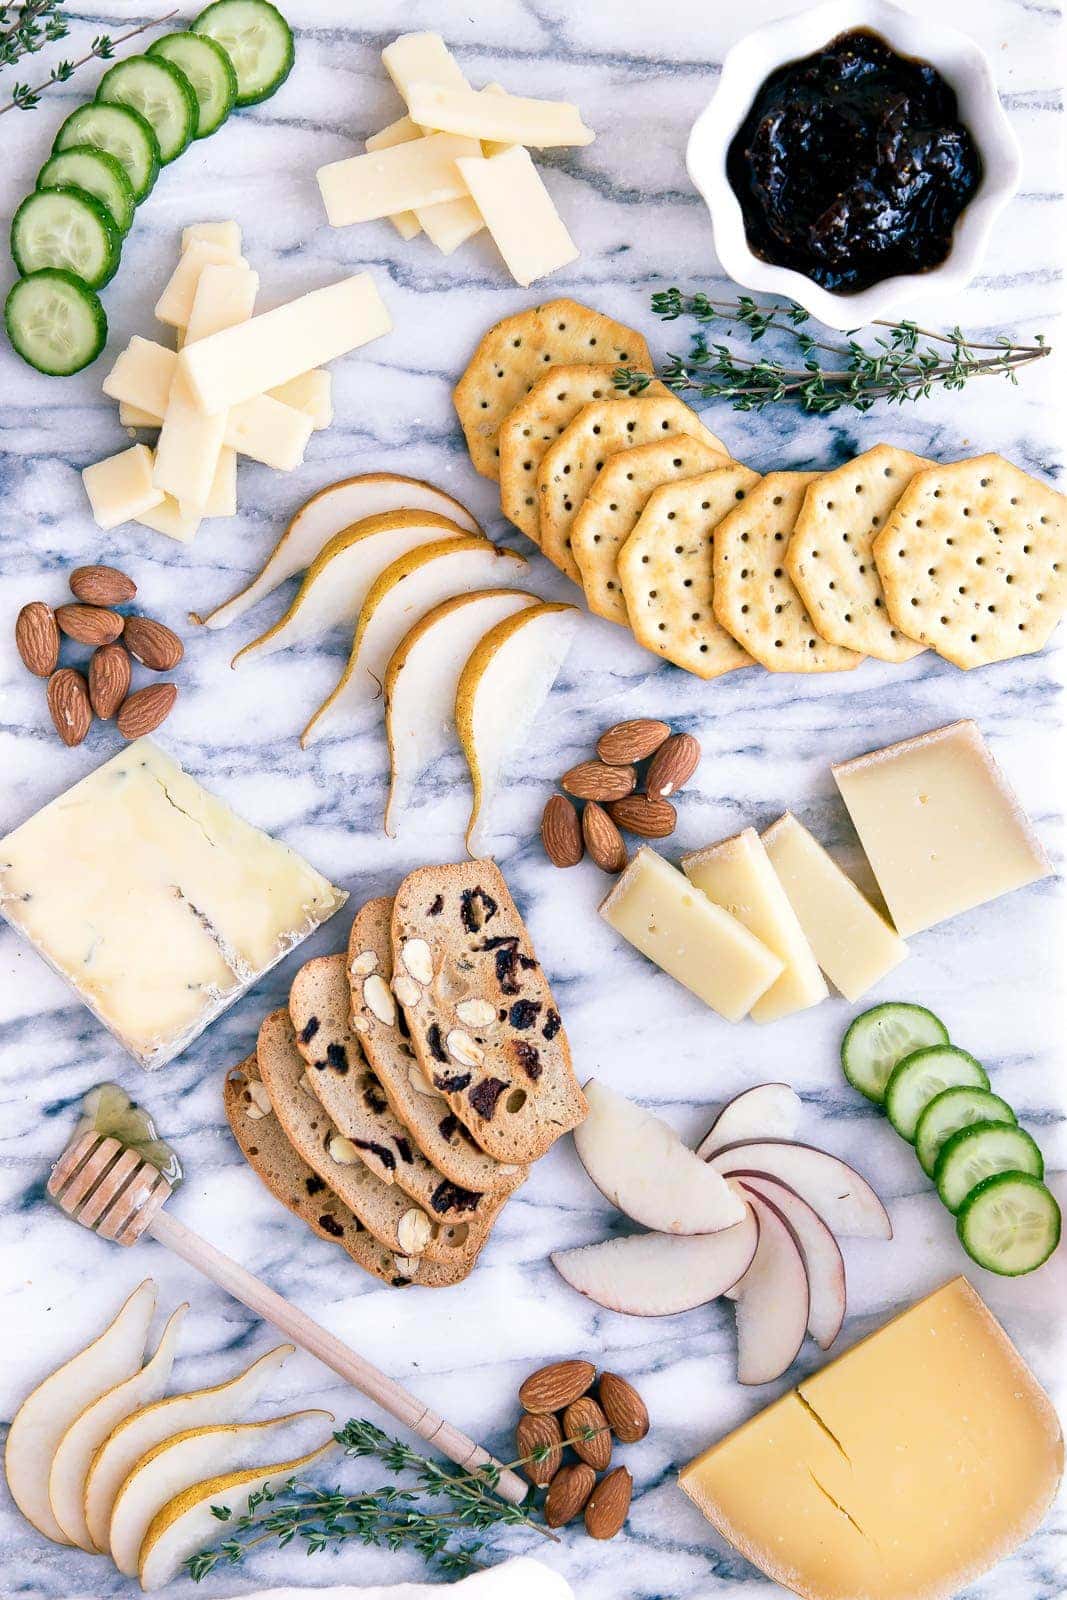 How To Make The Perfect Holiday Cheese Board + Giveaway - Broma Bakery